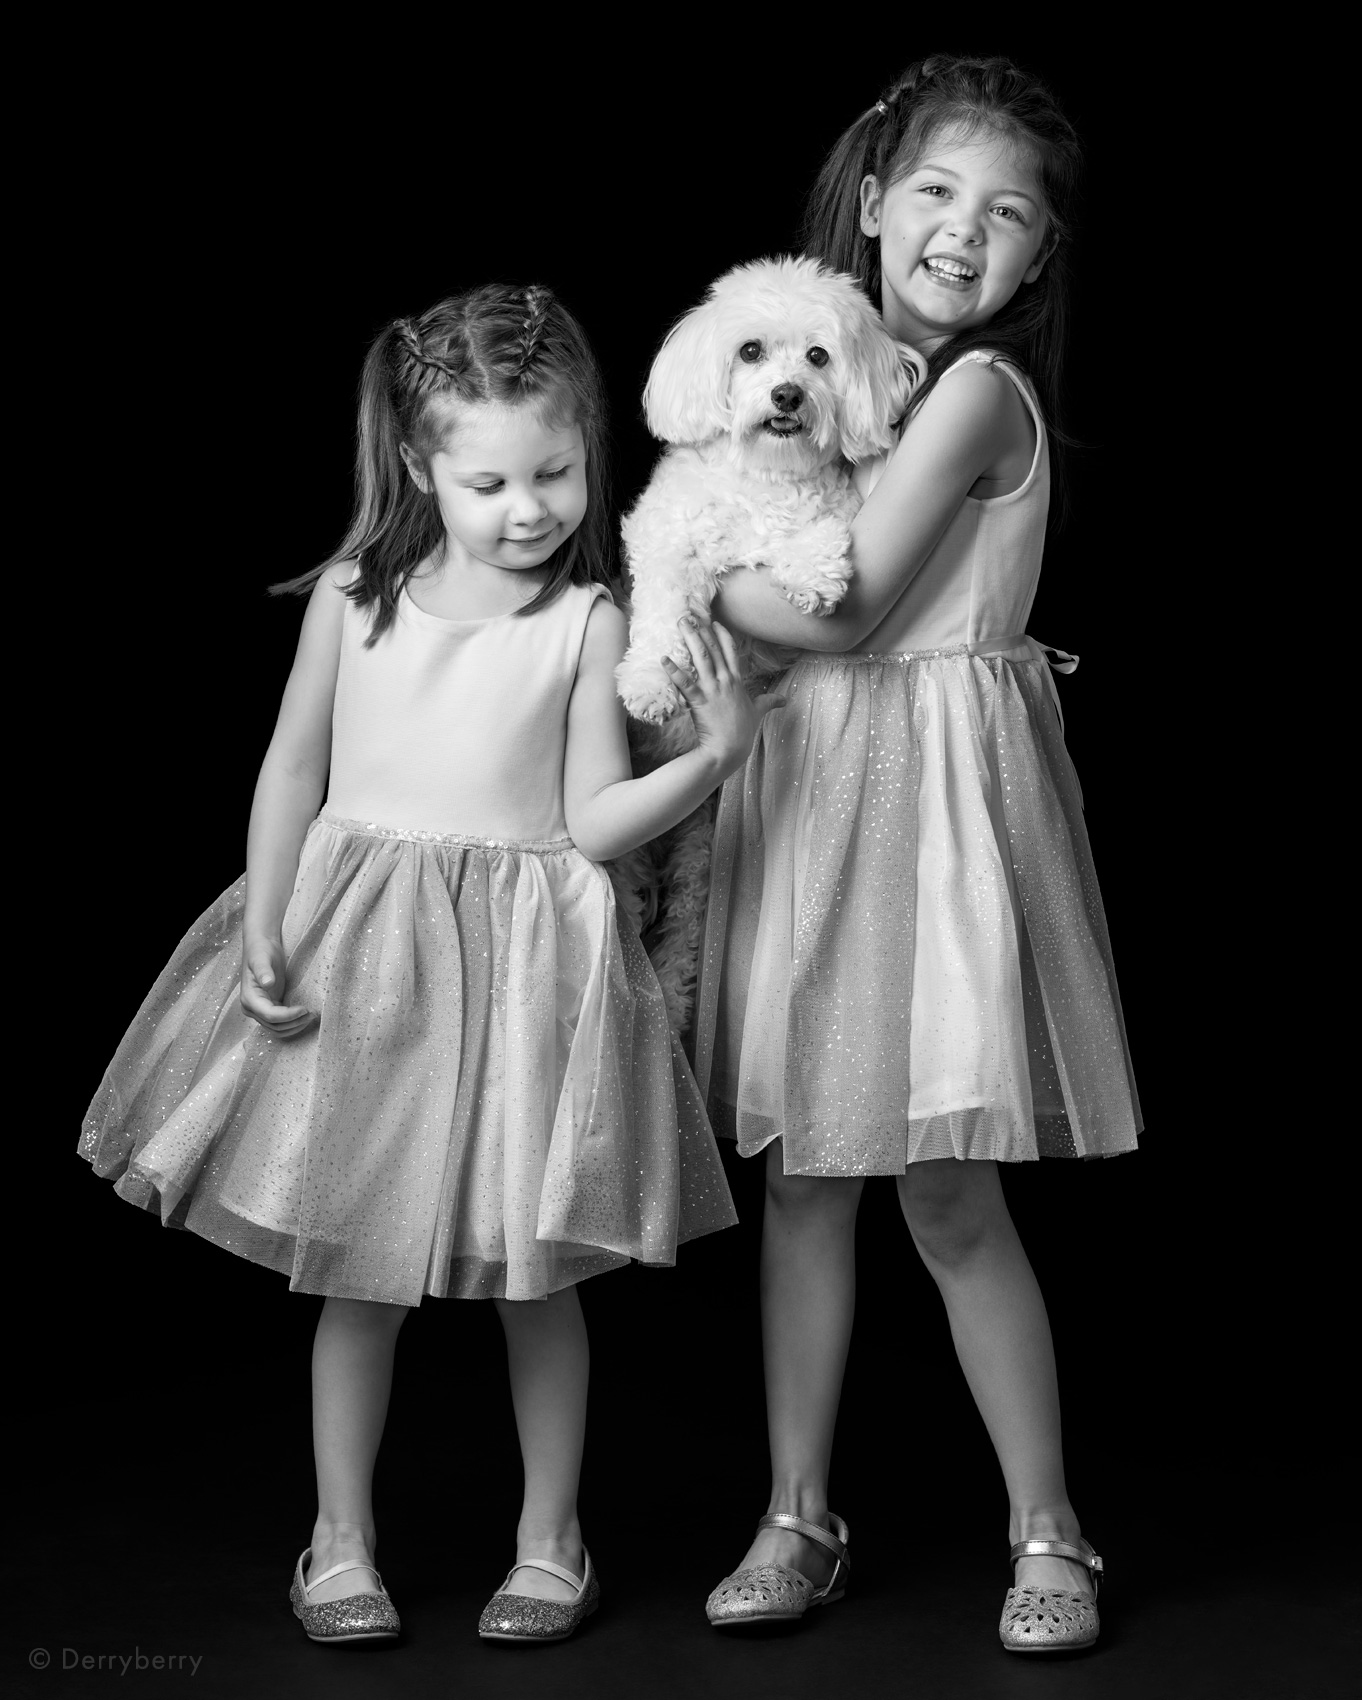  B&W full-length portrait of two young girls with sweet family dog in studio